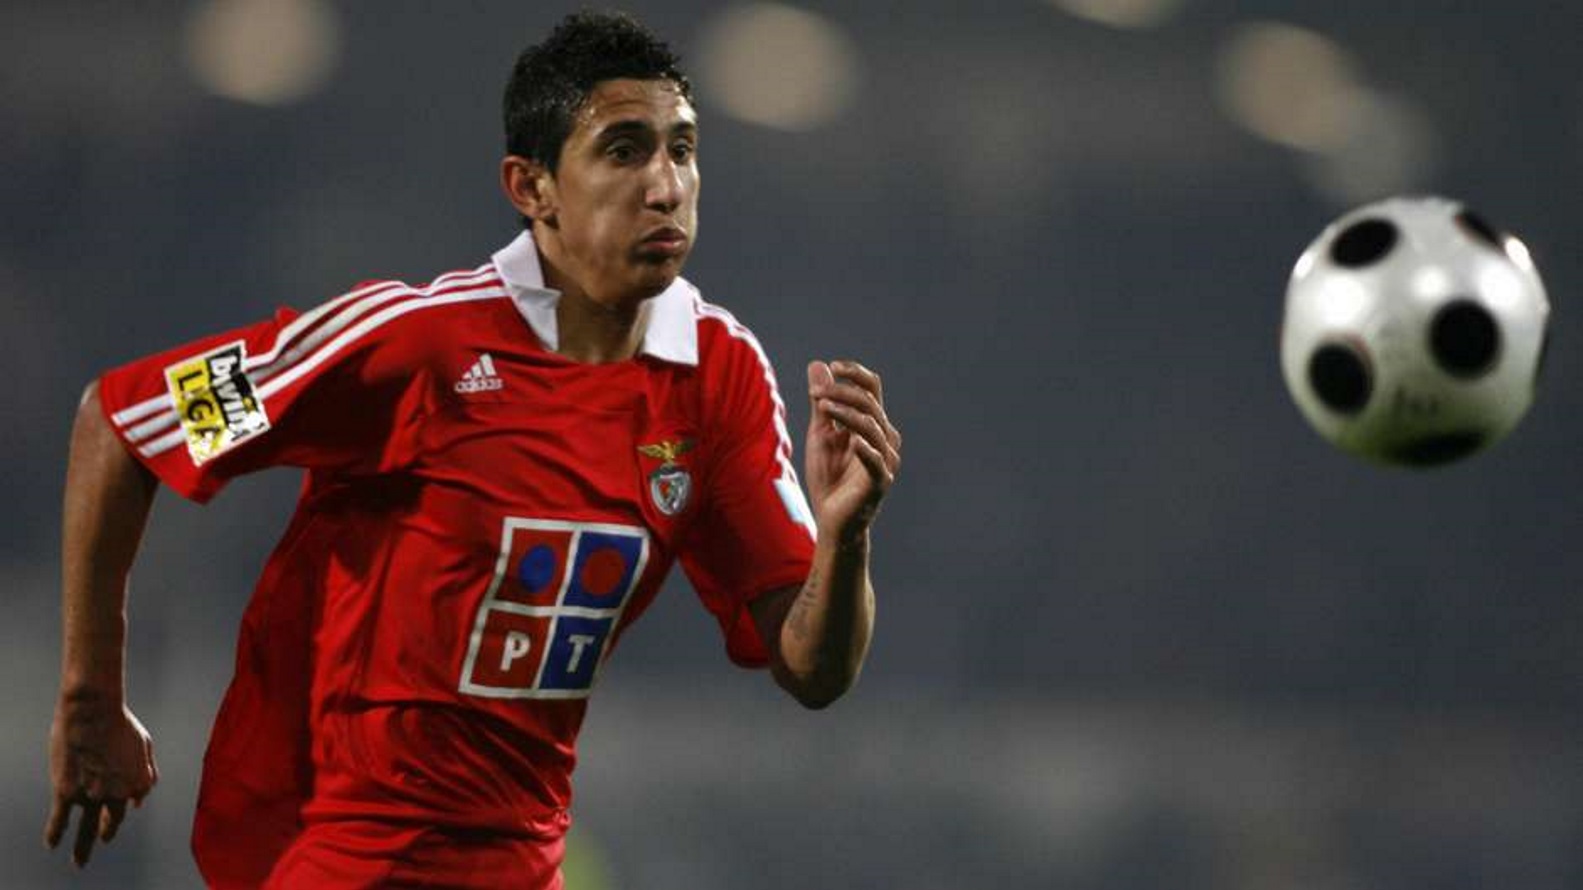 Di María has his days numbered at PSG: the European club that will seek to  repatriate him - Infobae